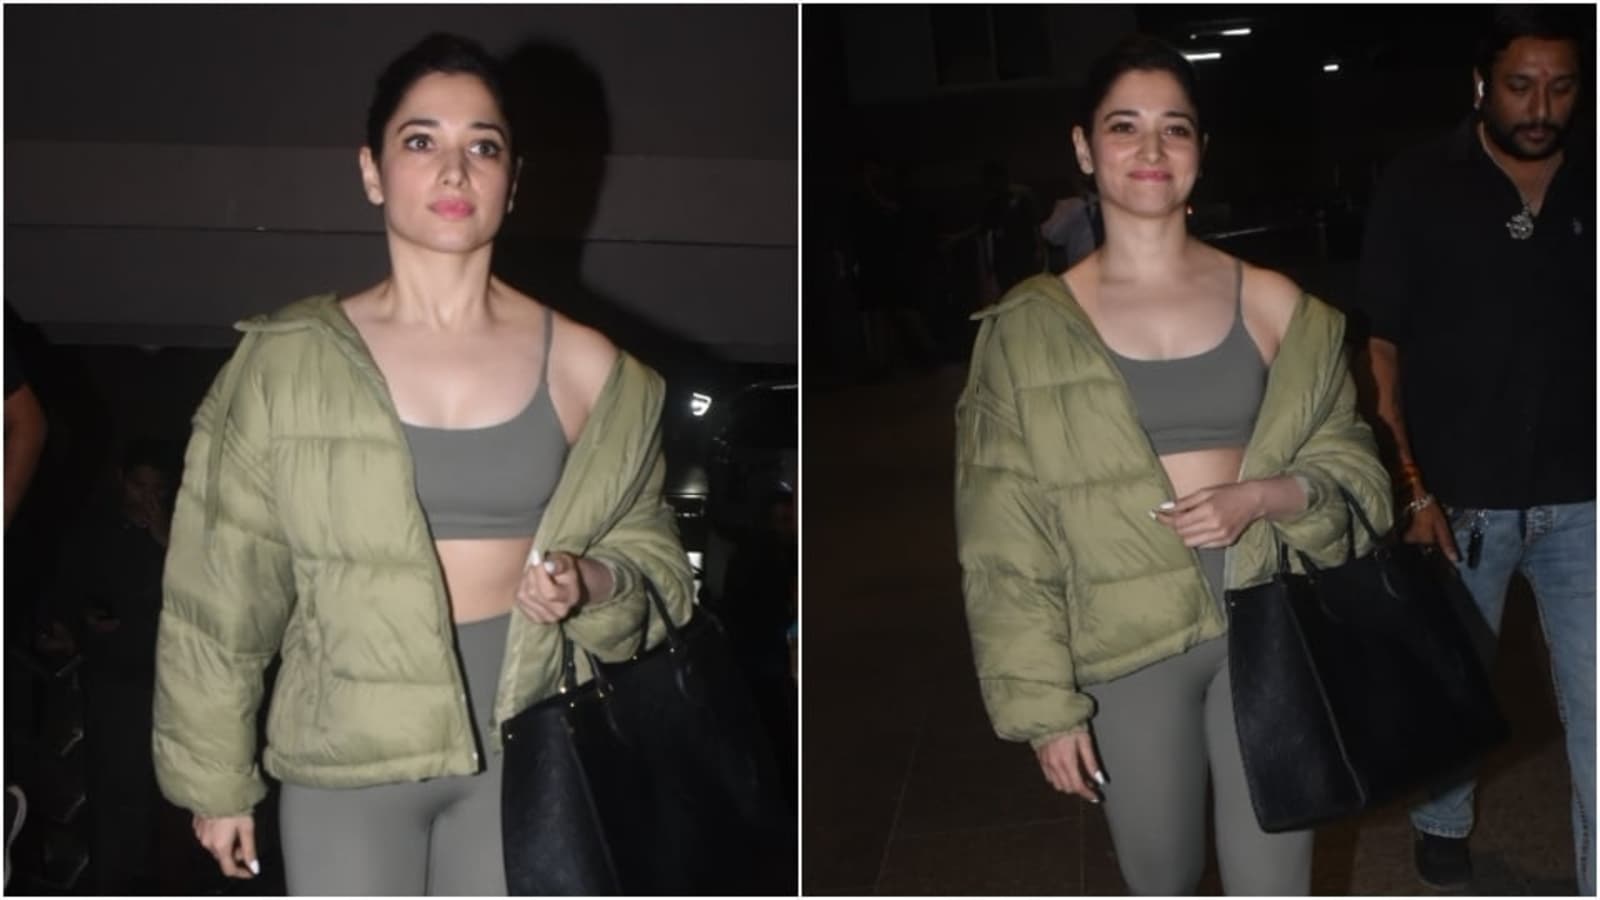 tamannaah-bhatia-s-athleisure-style-in-grey-sports-bra-tights-and-puffer-jacket-shows-how-to-glam-up-everyday-looks